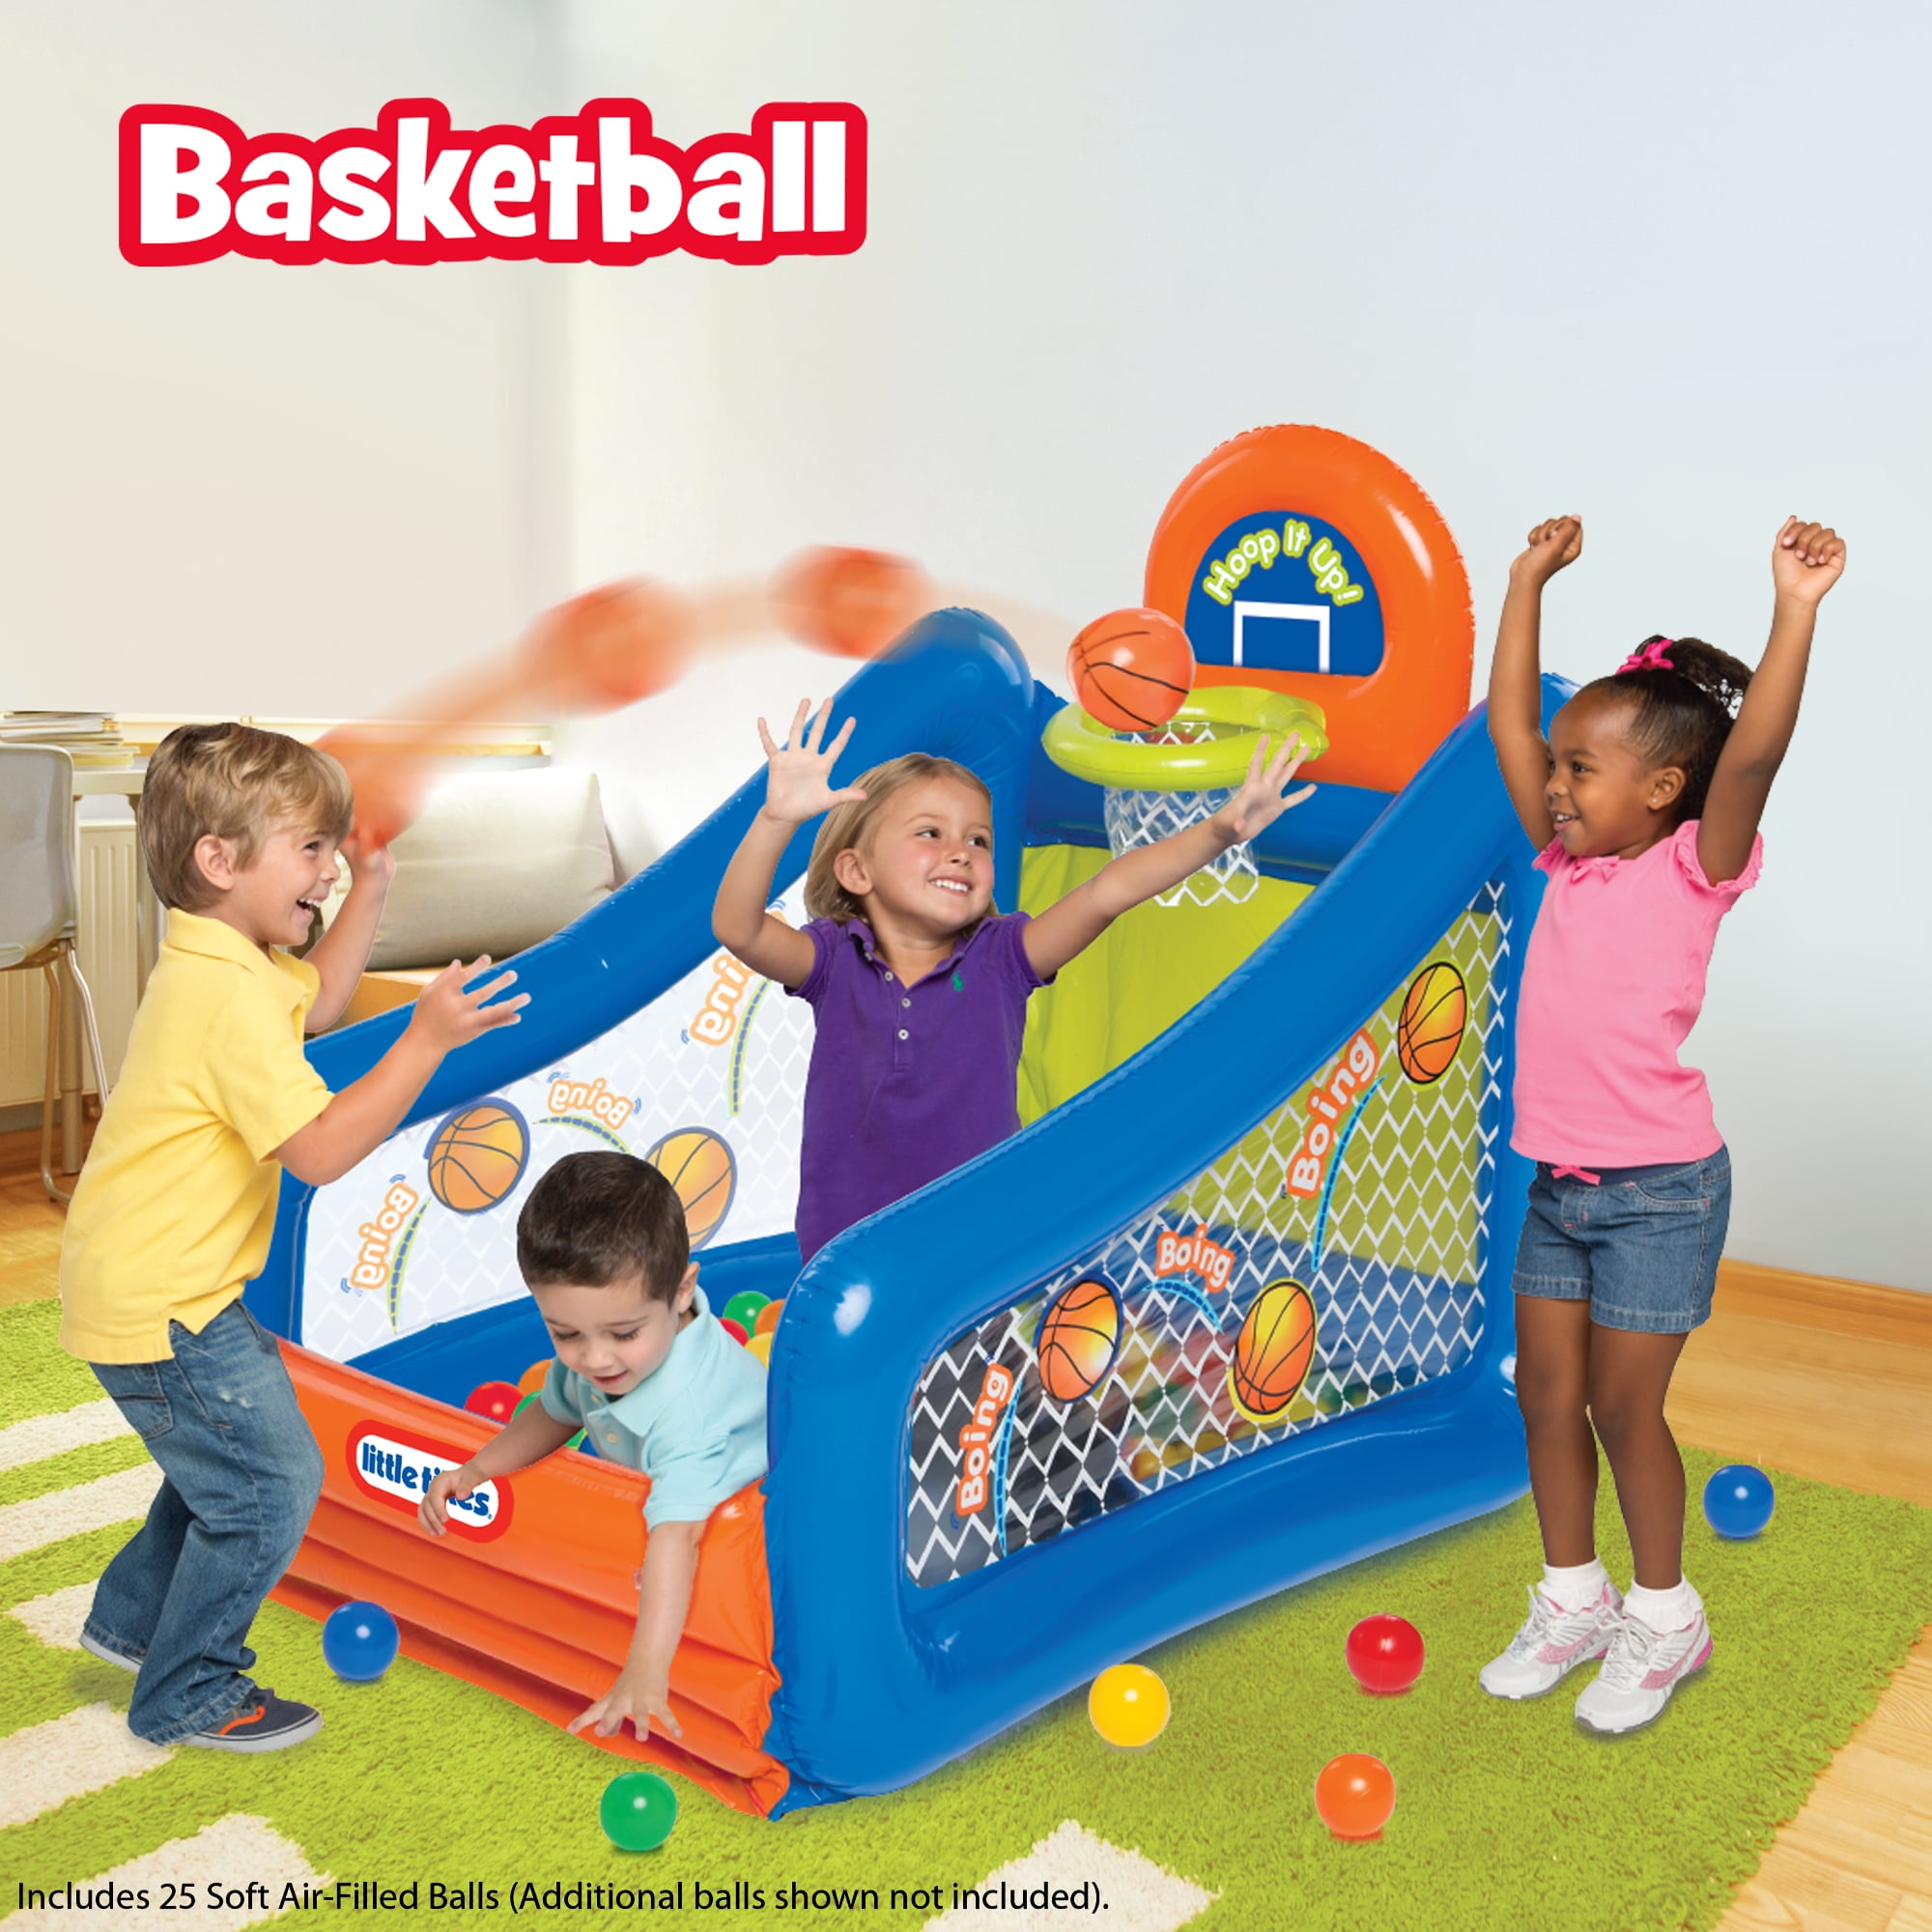 Little Tikes Brand Hoop It Up! Play Center Special Value Pack with 25 Balls, Toy Sports Ball Pit, Ages 3 Years Old and up - 1